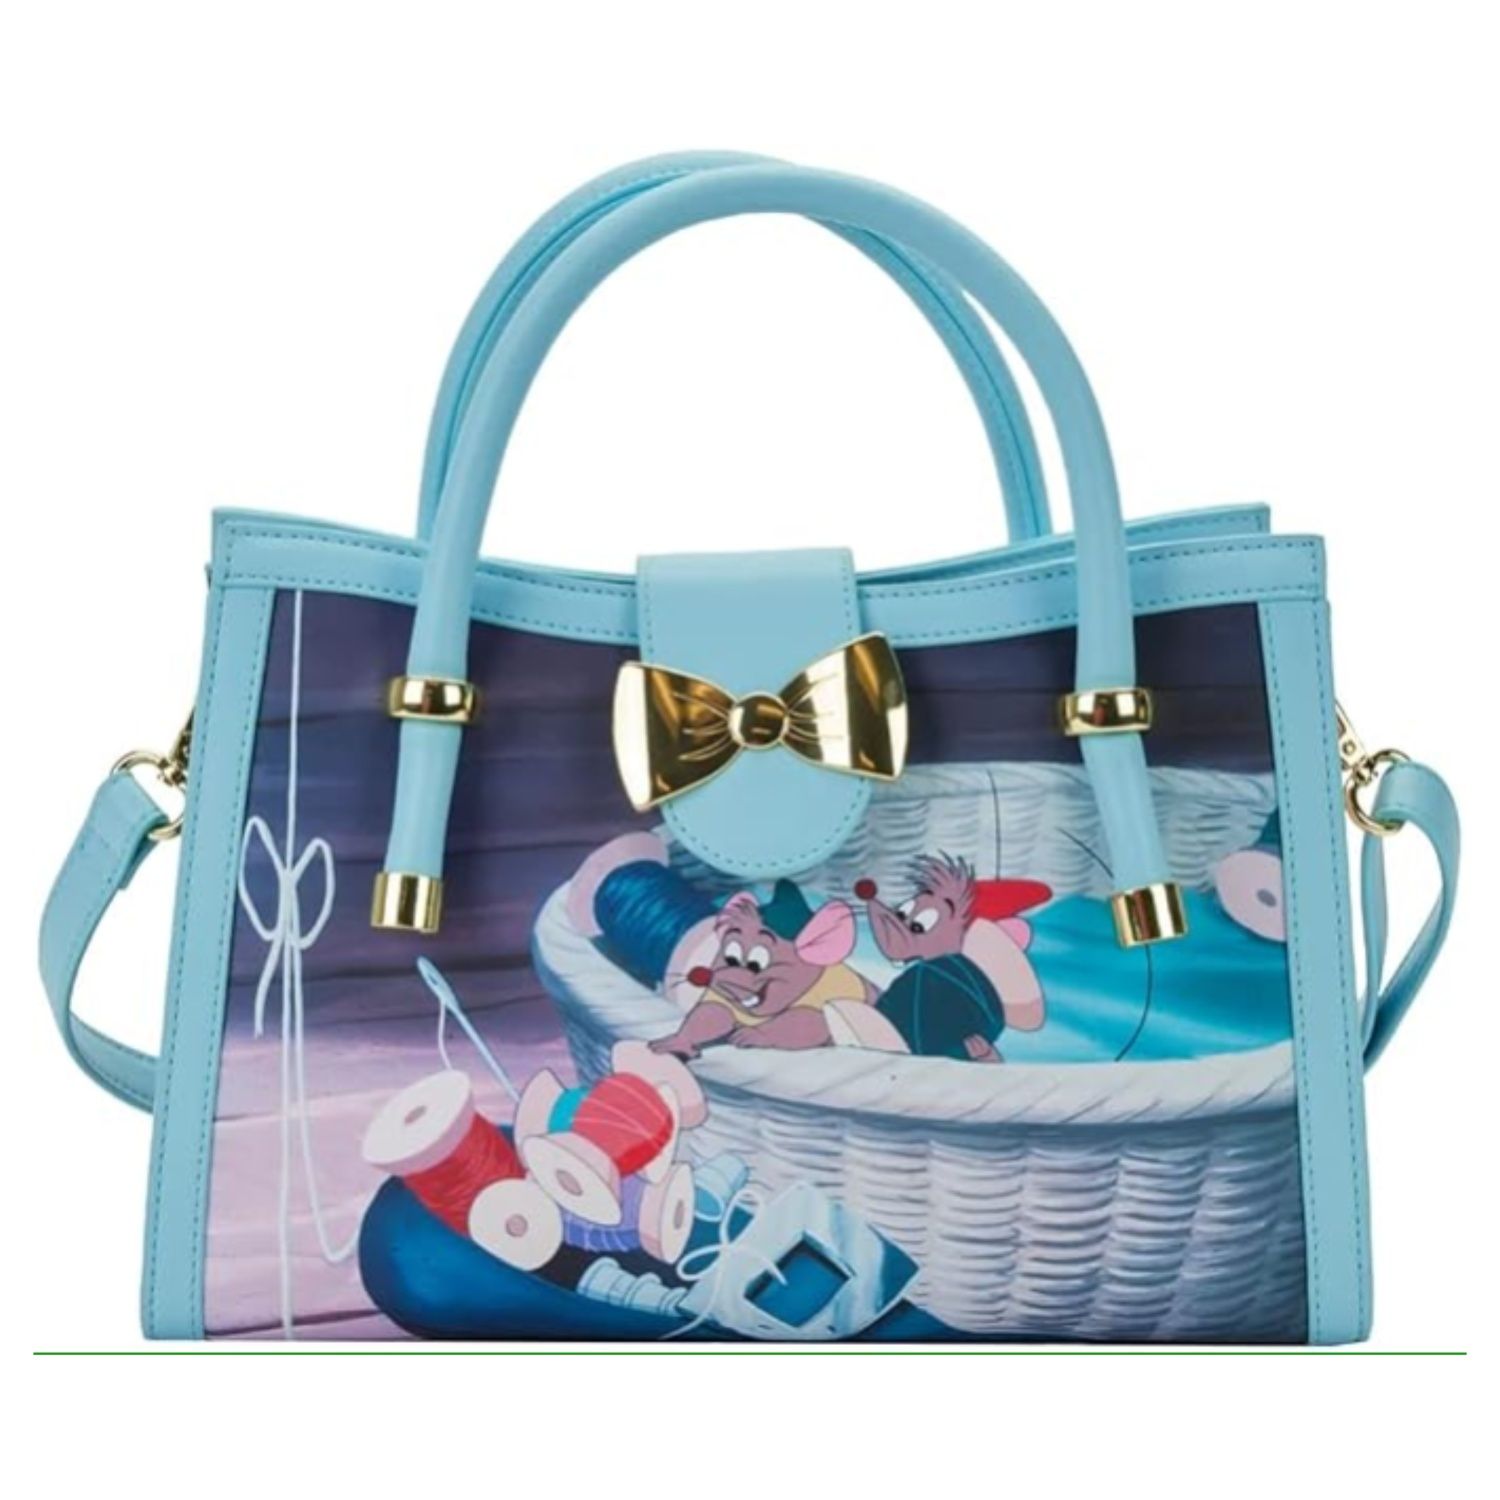 This blue trimmed handbag has the Cinderella mice sitting in a sewing basket printed on it.